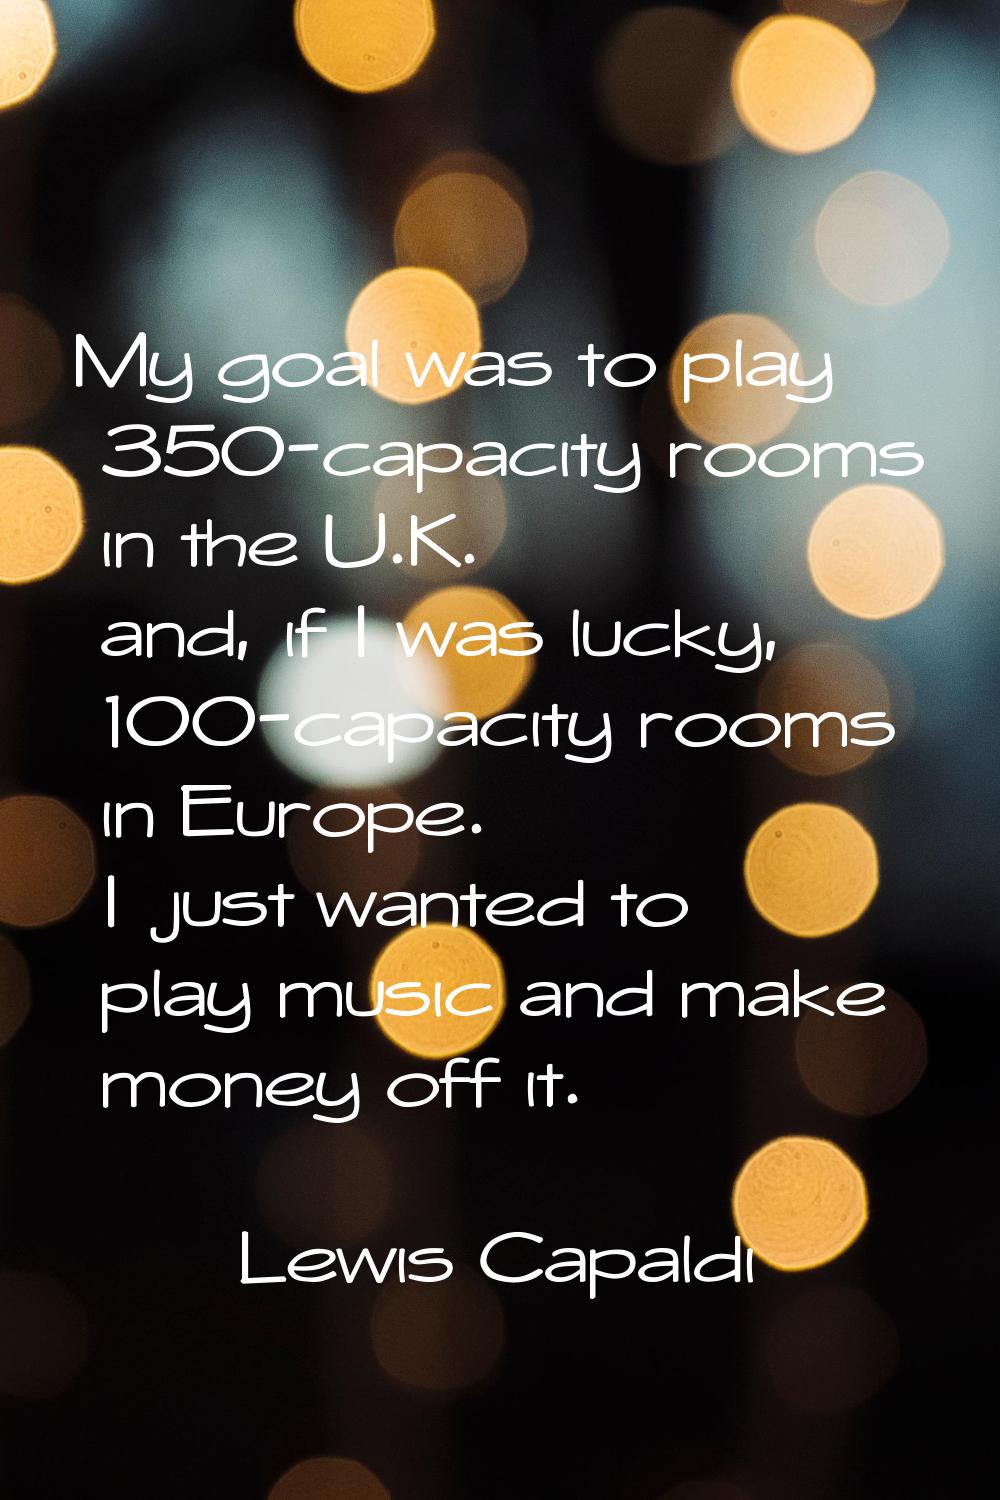 My goal was to play 350-capacity rooms in the U.K. and, if I was lucky, 100-capacity rooms in Europ